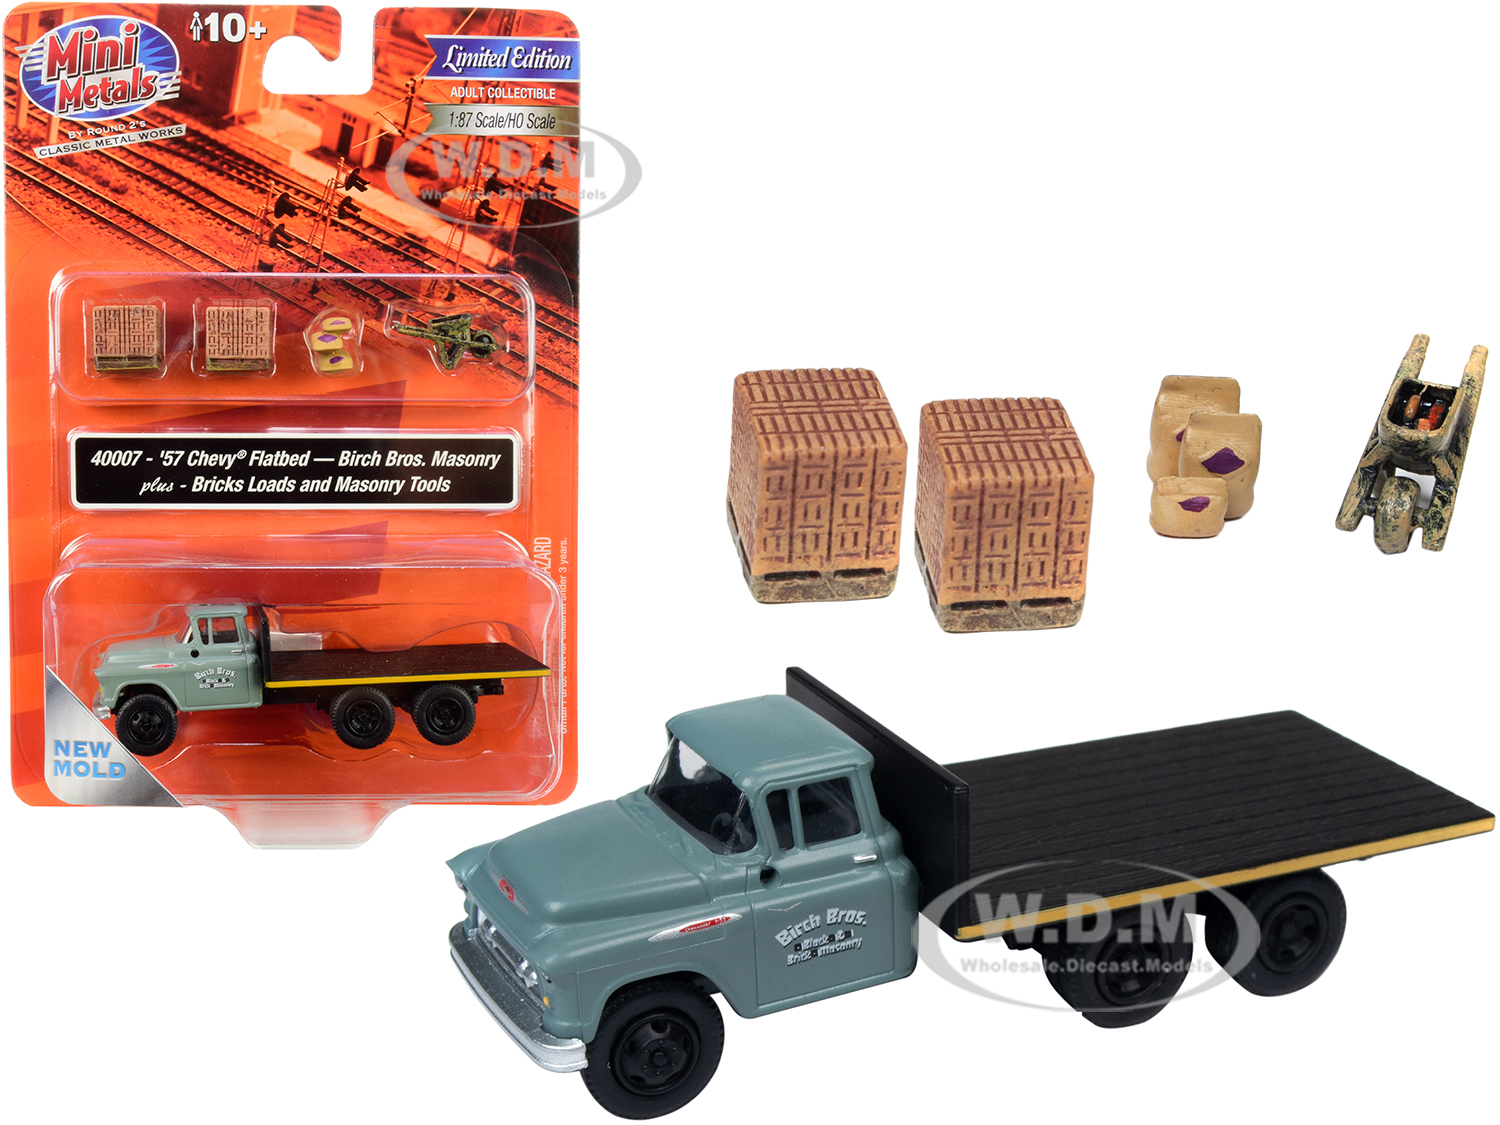 1957 Chevrolet Flatbed Truck "birch Bros. Masonry" With Two Brick Loads Three Sacks And Wheelbarrow 1/87 (ho) Scale Model By Classic Metal Works